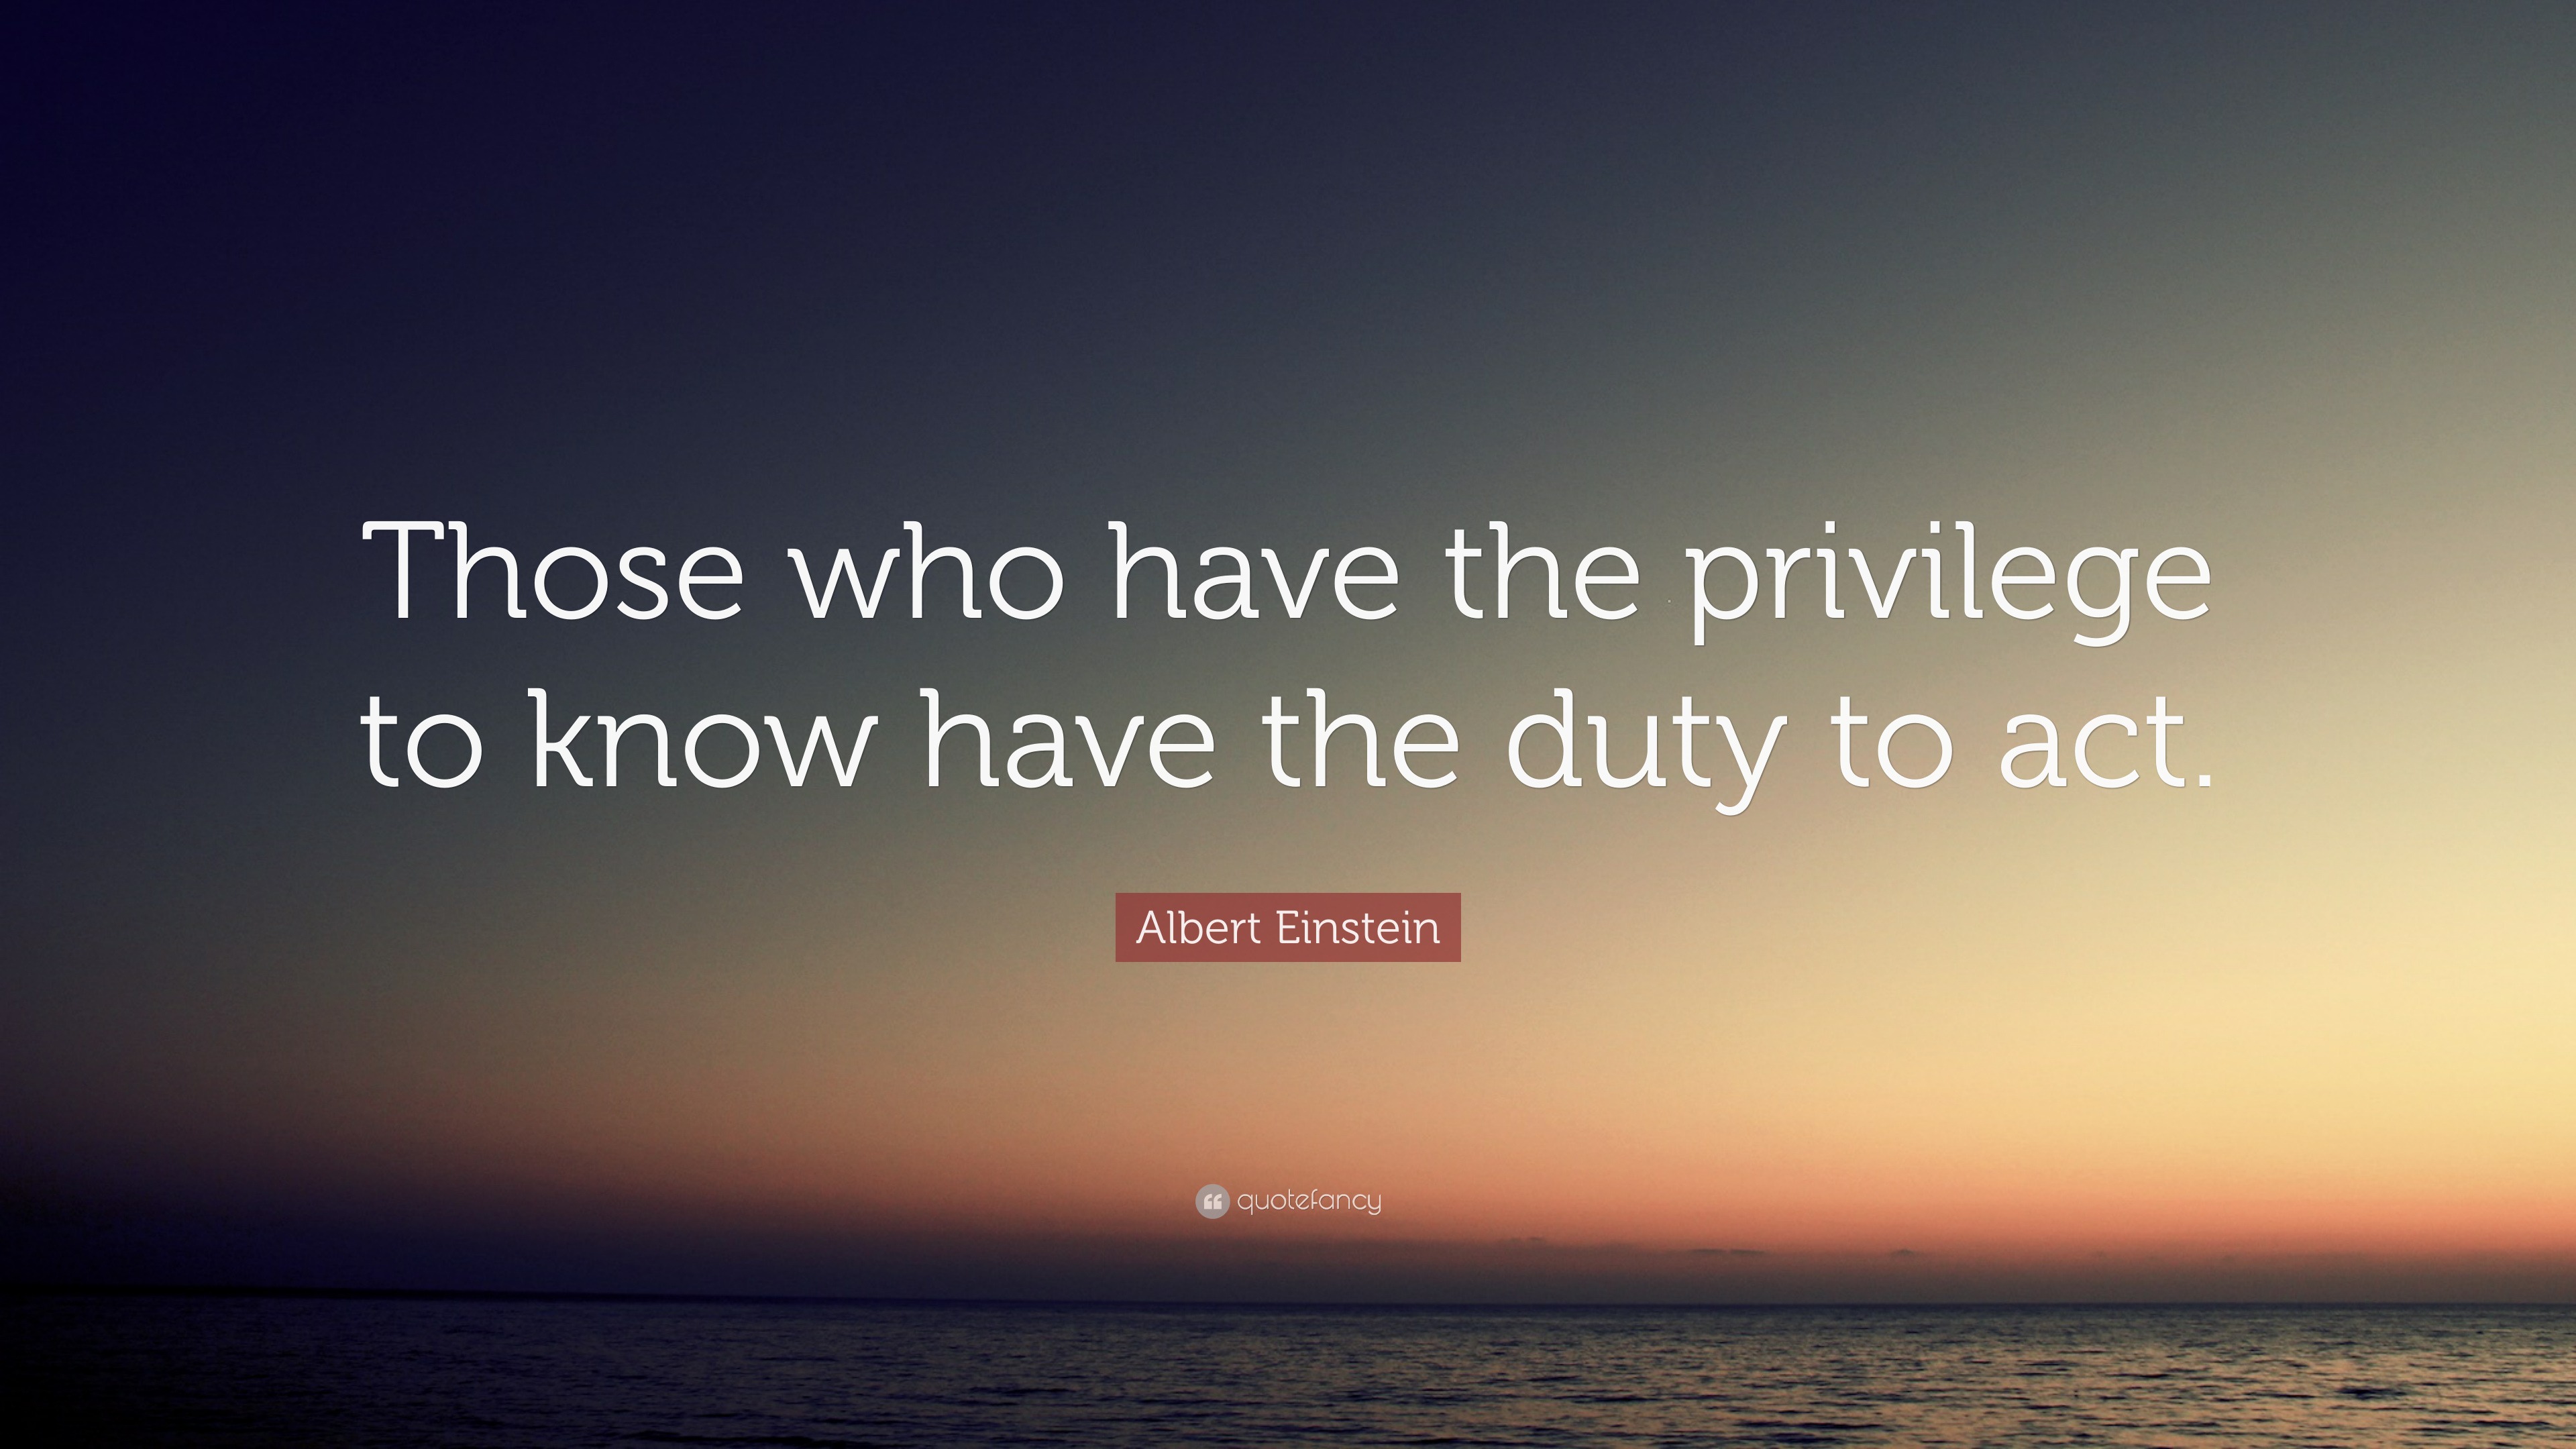 Albert Einstein Quote: “Those who have the privilege to know have the ...